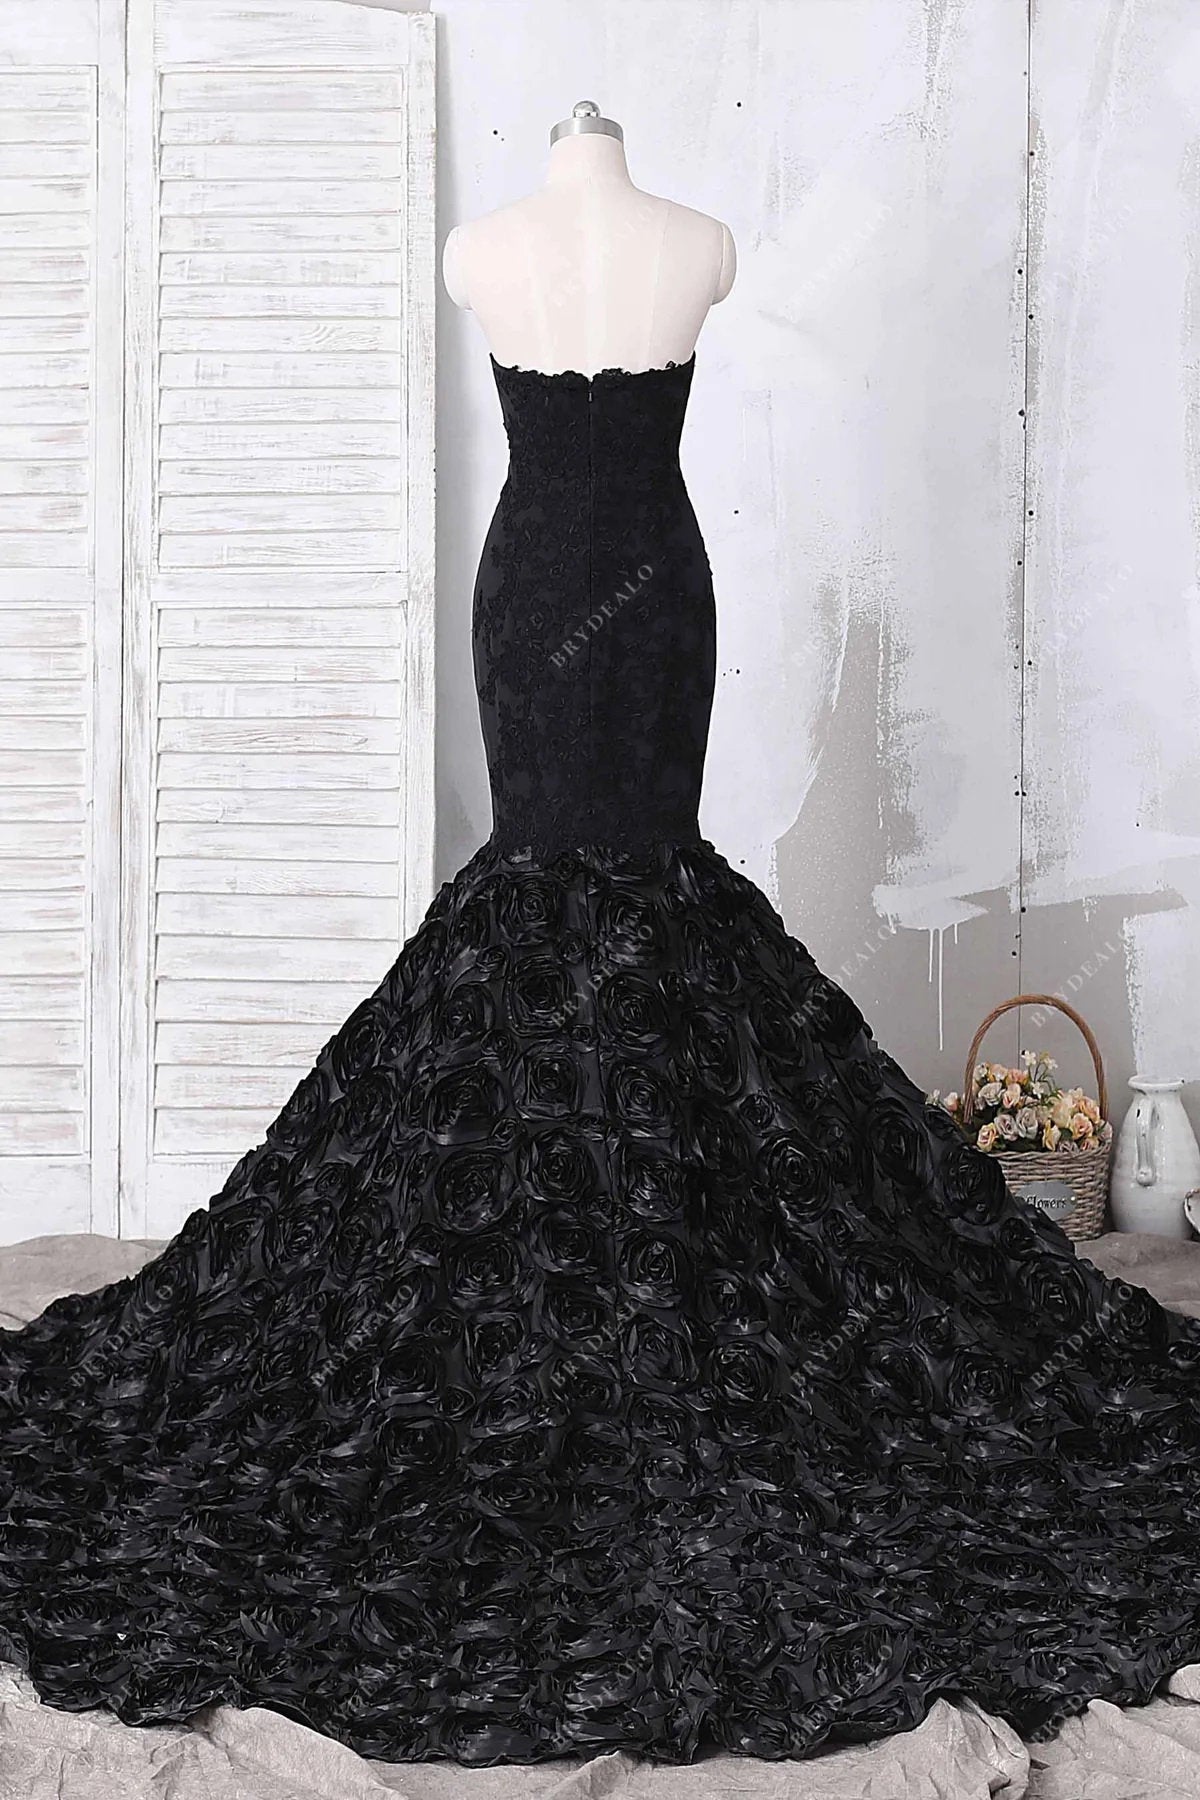 Black Sleeveless Strapless Wedding Dress 3D Rosette Train Bridal Gown Unique Design Gothic Queen Fitted Mermaid Sweetheart Neckline Backless